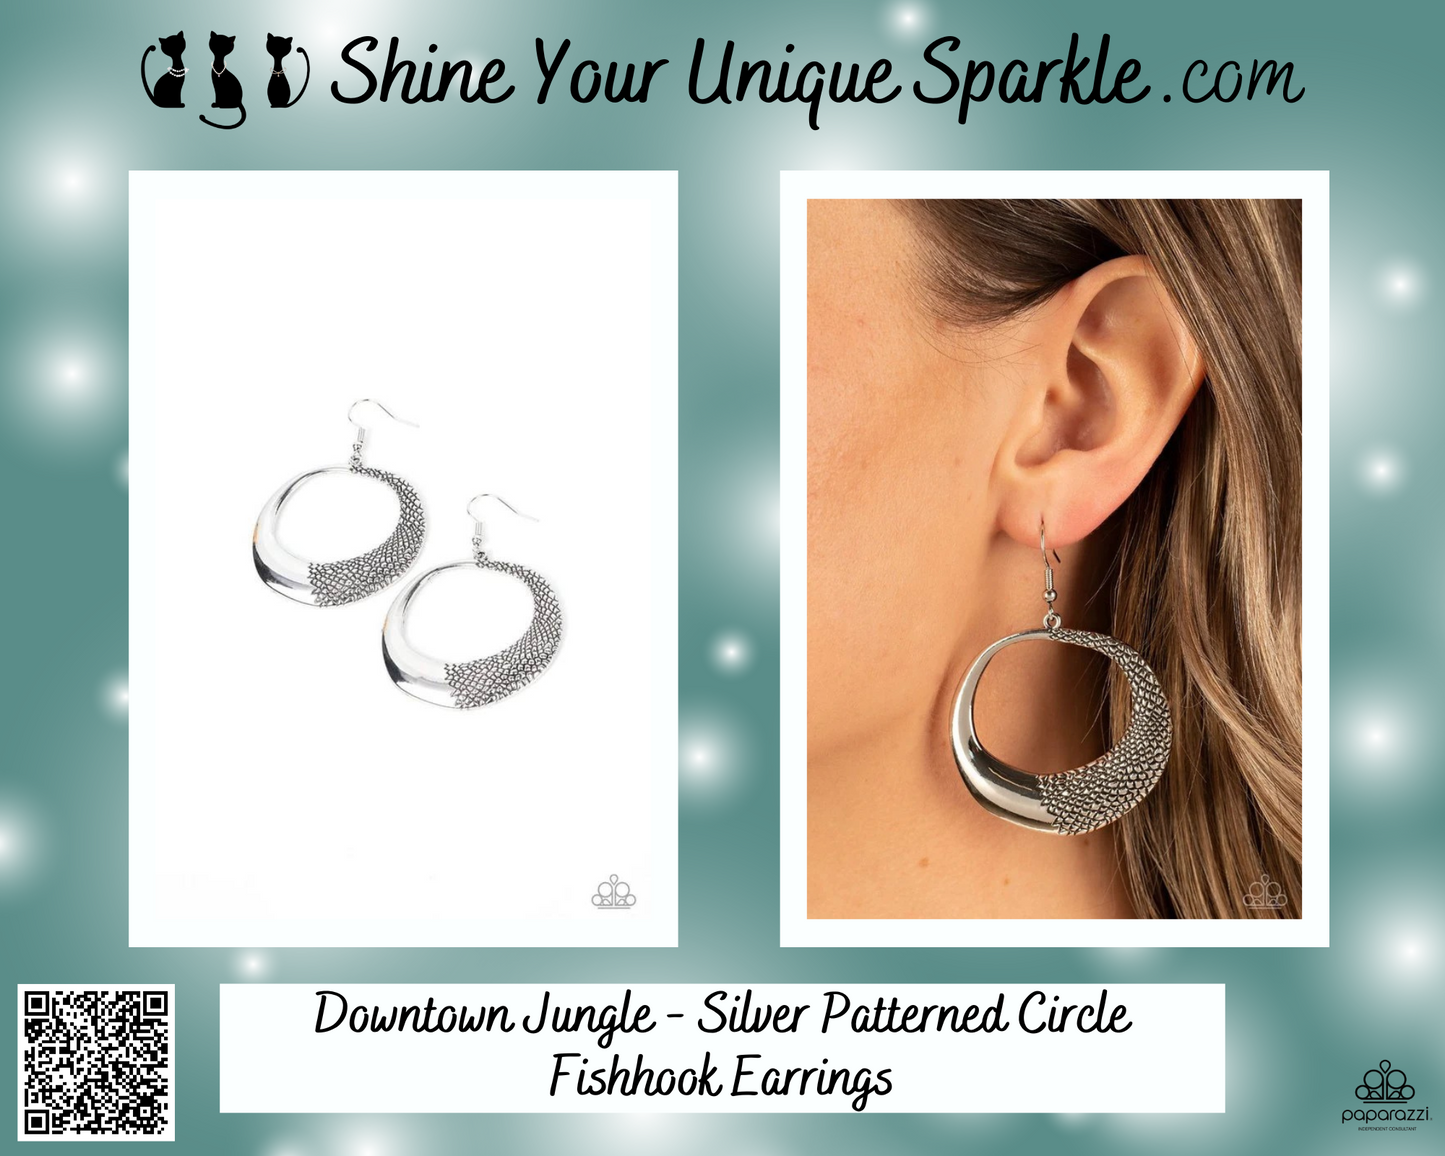 Downtown Jungle - Silver Patterned Circle Fishhook Earrings